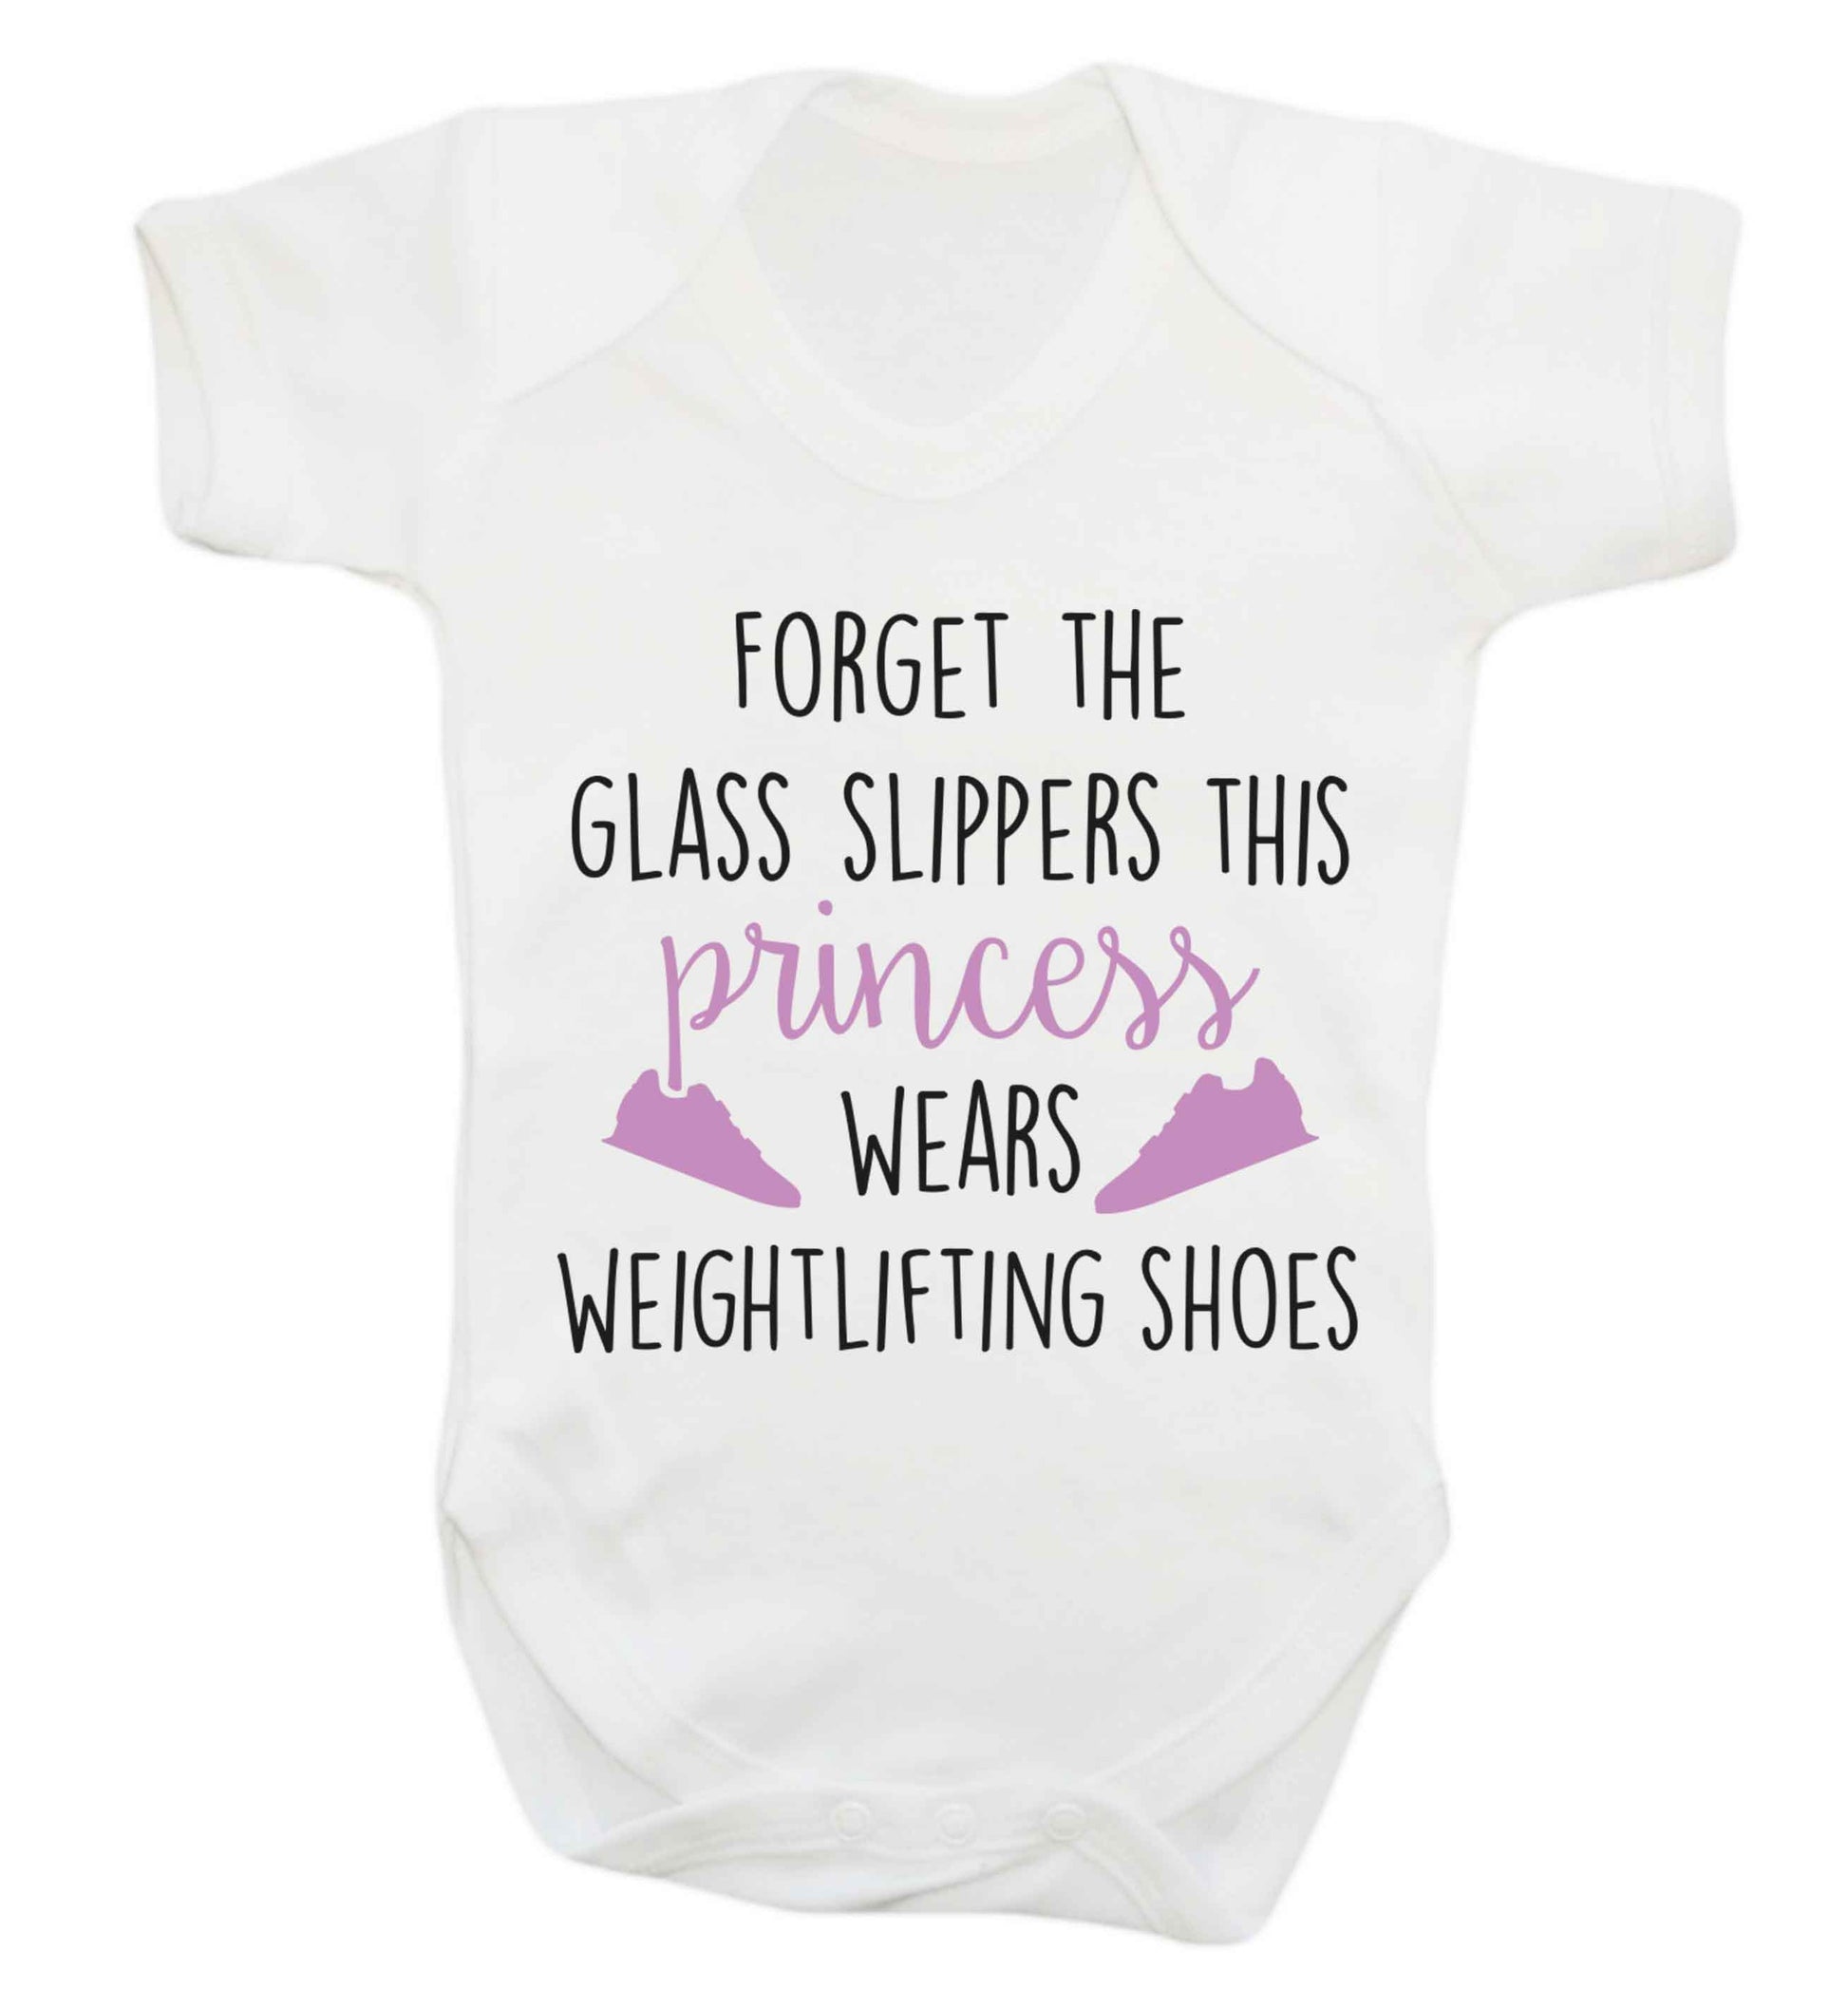 Forget the glass slippers this princess wears weightlifting shoes Baby Vest white 18-24 months